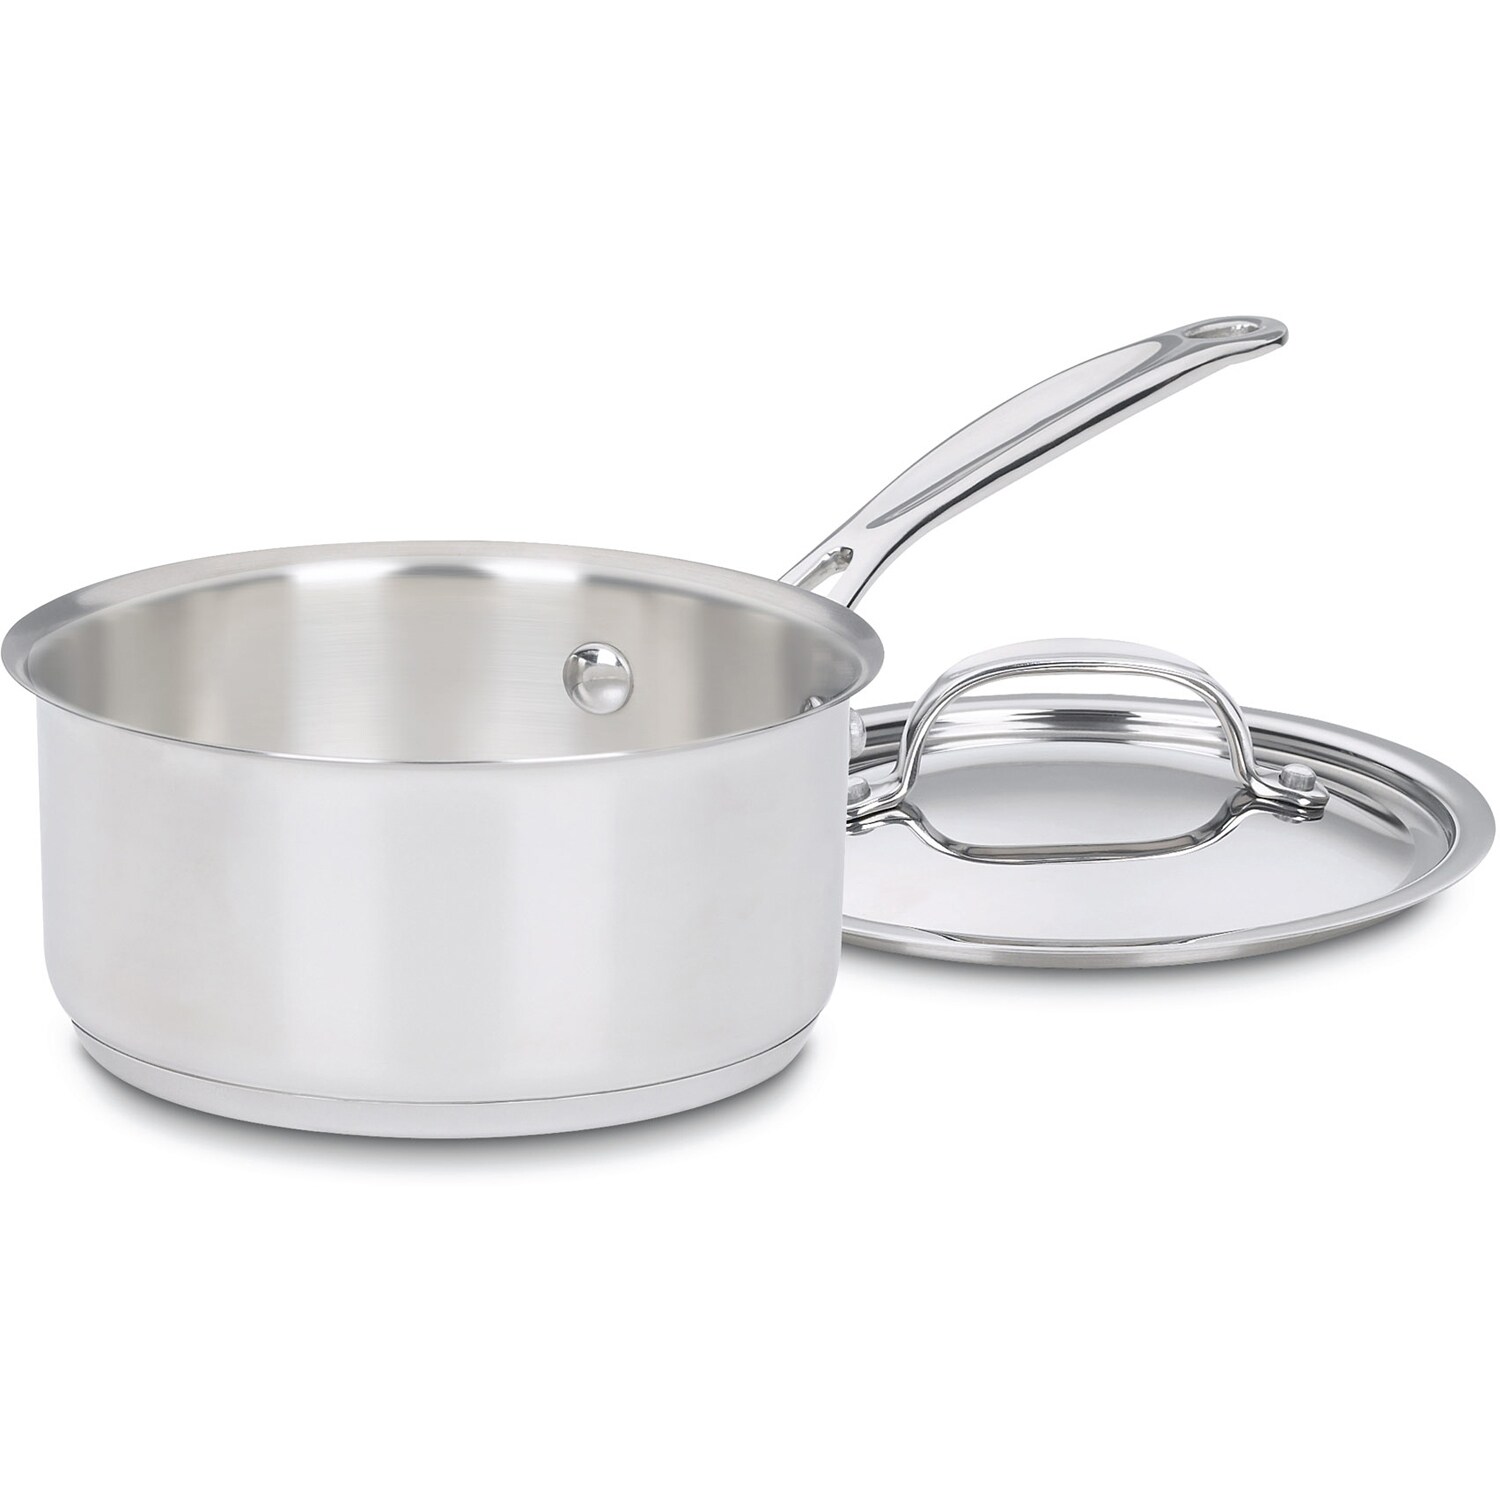 https://ak1.ostkcdn.com/images/products/7211734/Cuisinart-Chefs-Classic-Stainless-1-Quart-Saucepan-with-Cover-abe956fa-1355-41cf-b2d7-d1c9781c1be6.jpg